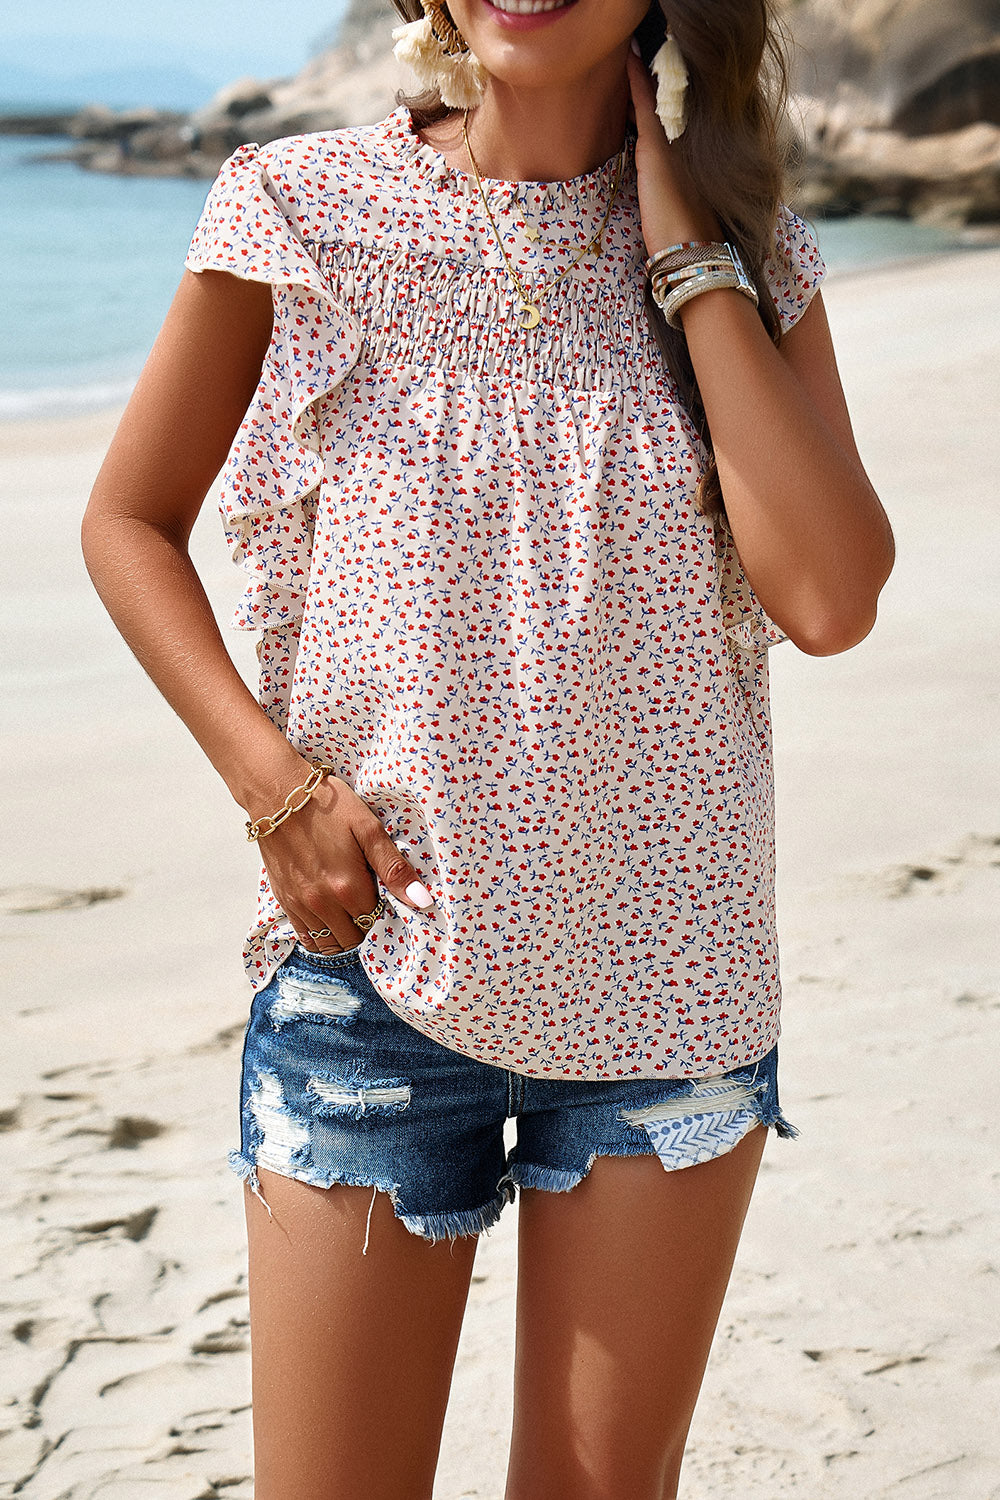 Sunny Forecast Smocked Floral Top, FIVE COLORS!